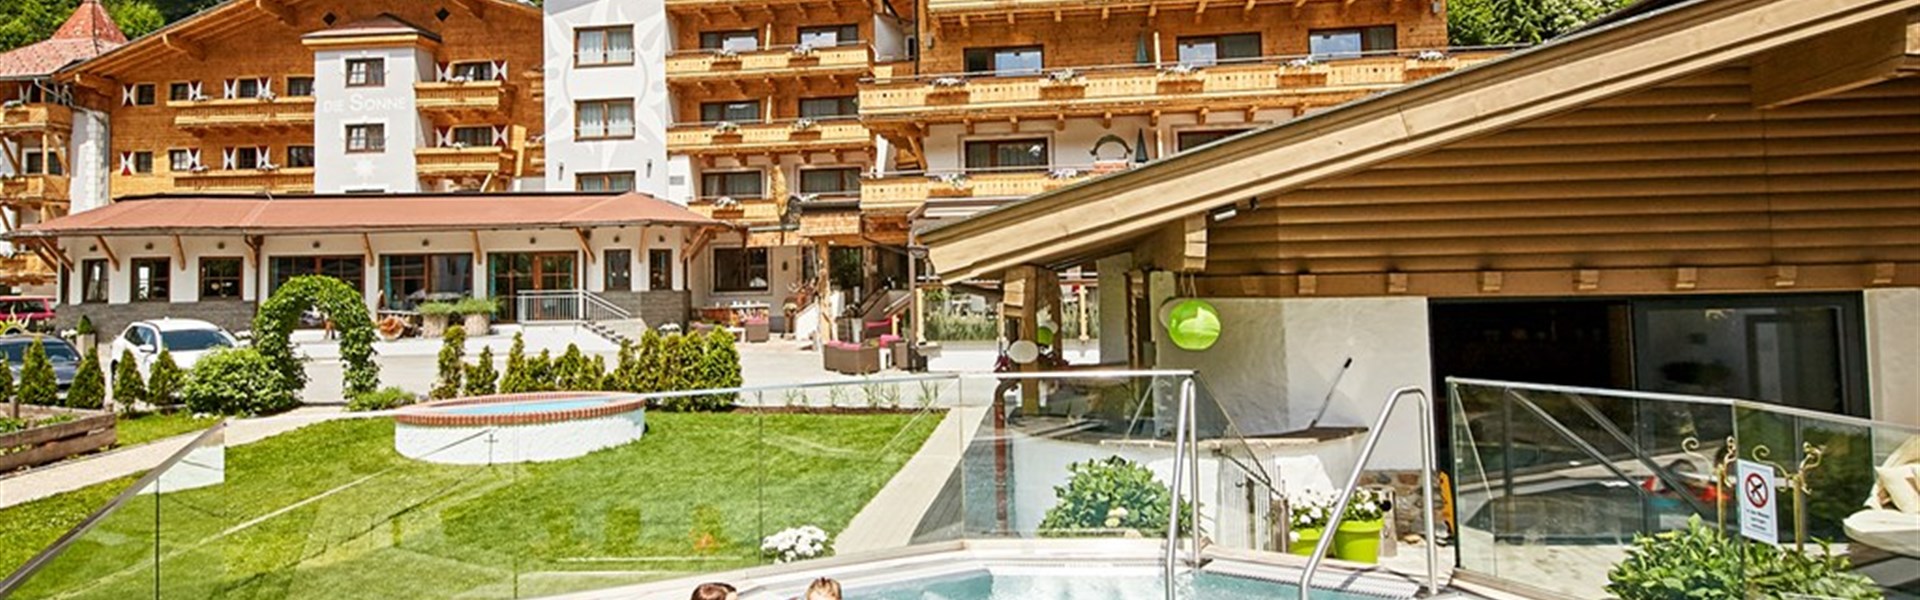 Marco Polo - Hotel Sonne (S) - 